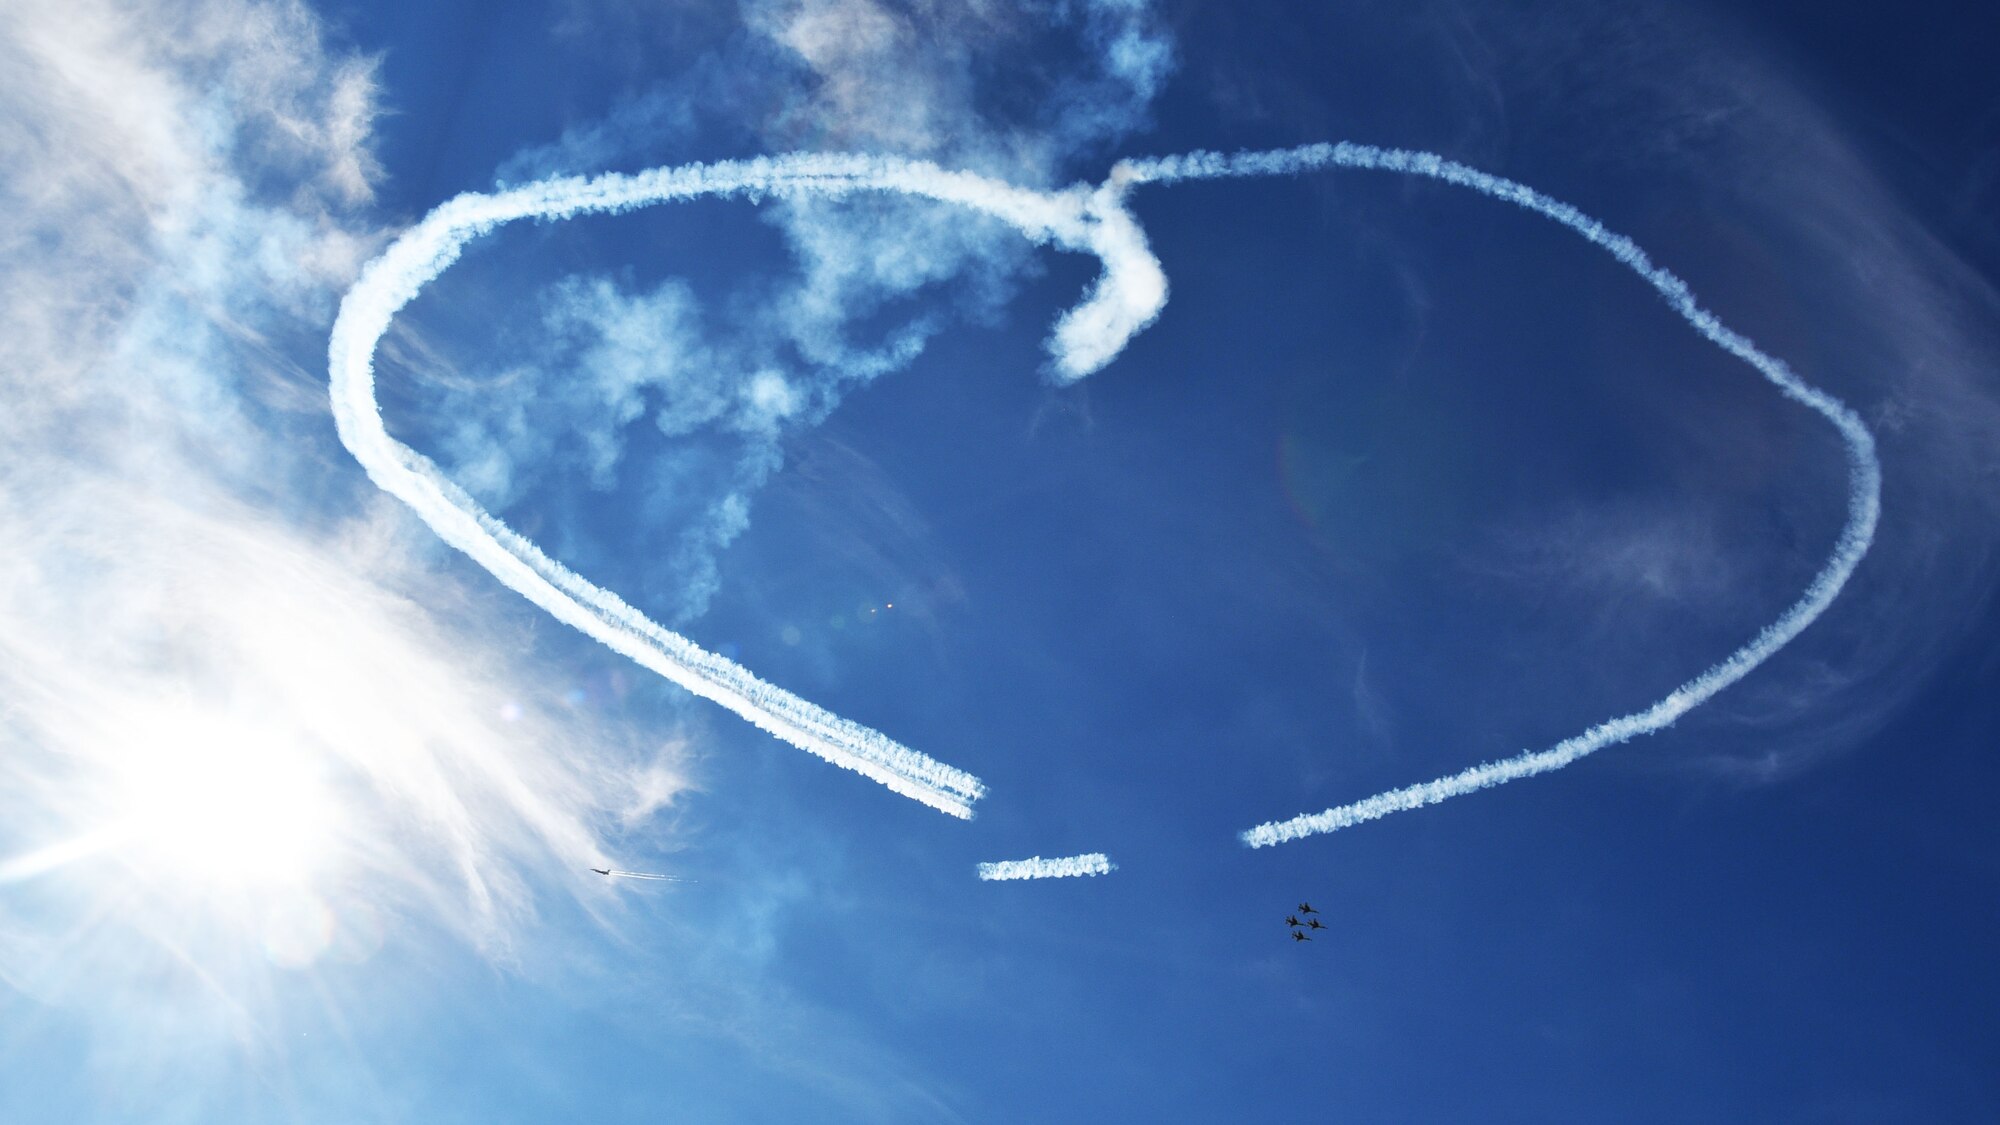 The U.S. Air Force Thunderbirds make a heart shape for the families of deployed servicemembers at the Frontiers in Flight Open House and Airshow Sept. 9, 2018, McConnell Air Force Base, Kan. This was the first performance by the team at McConnell since 2012.  (U.S. Air Force photo by Tech. Sgt. Abigail Klein)